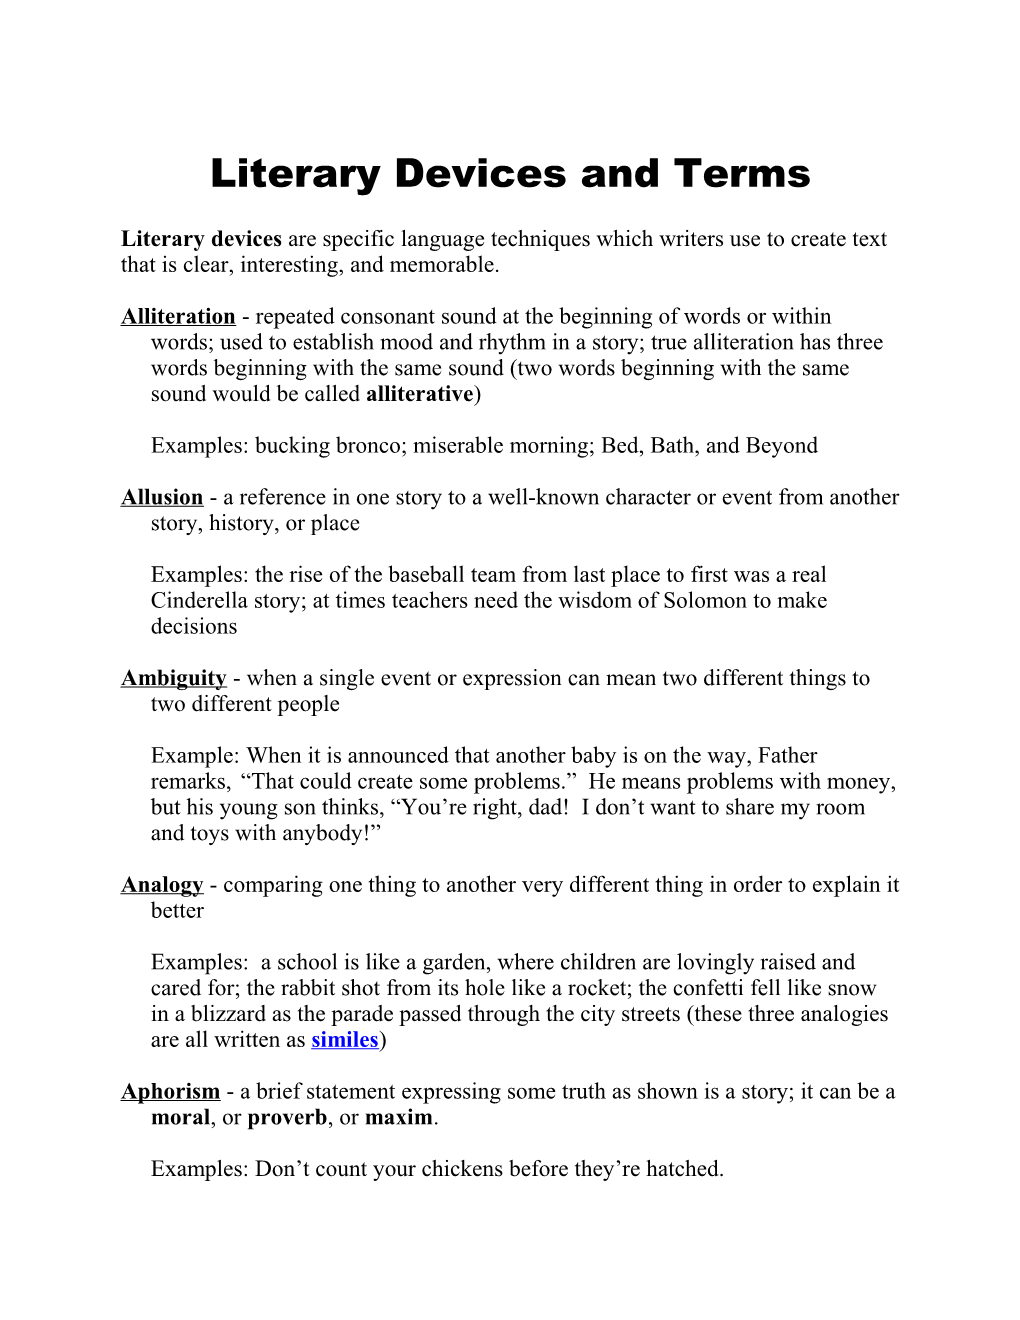 Literary Devices and Terms